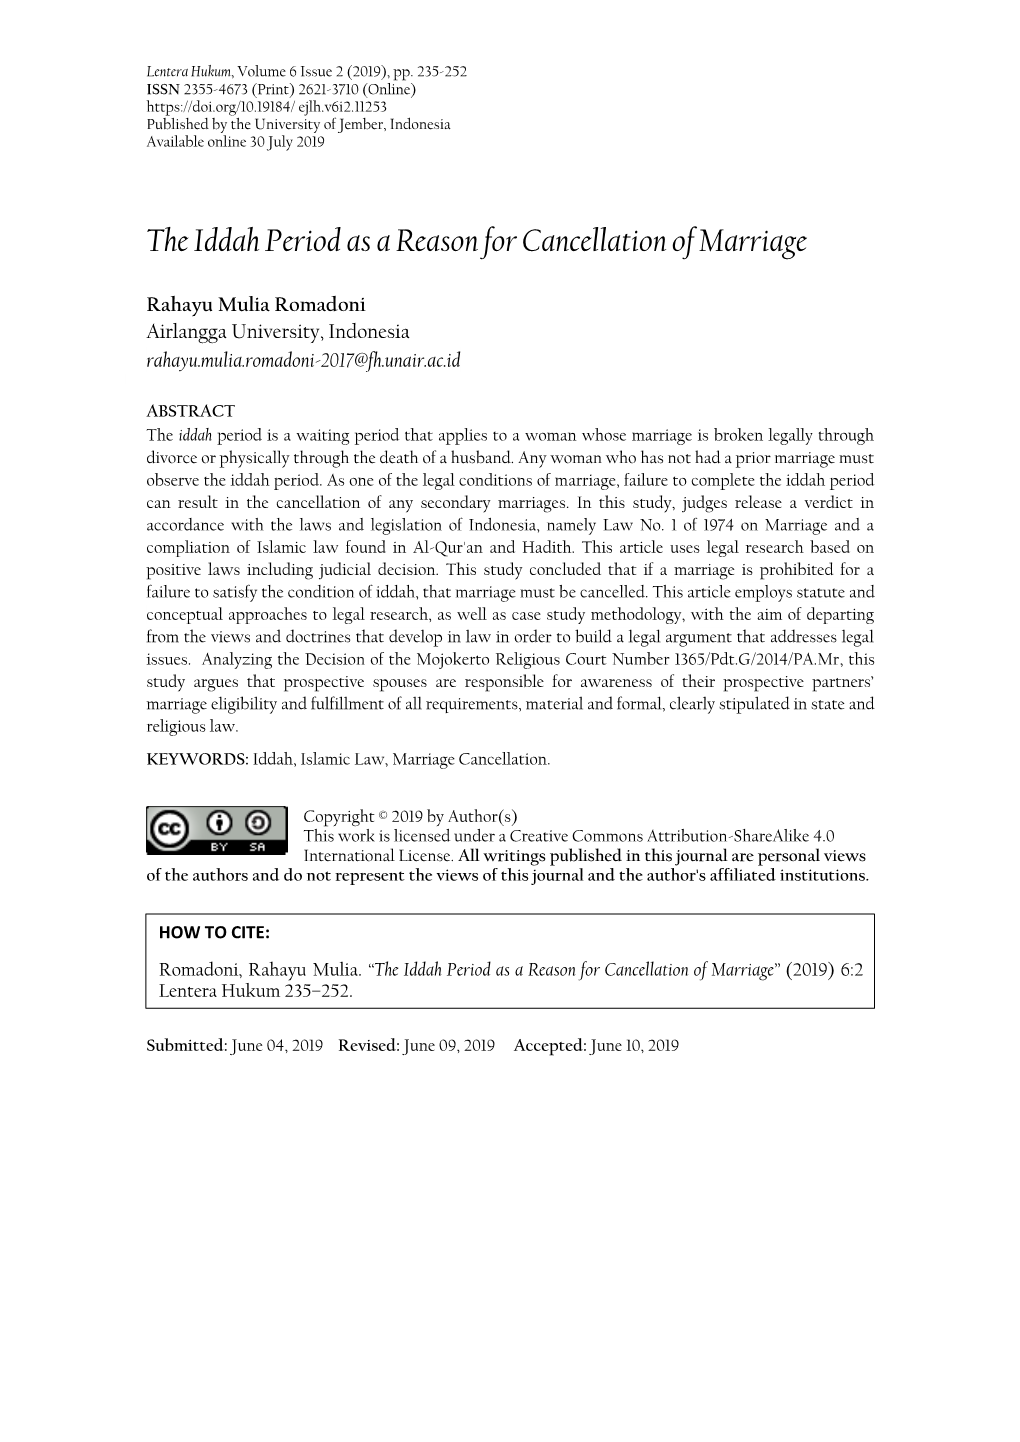 The Iddah Period As a Reason for Cancellation of Marriage